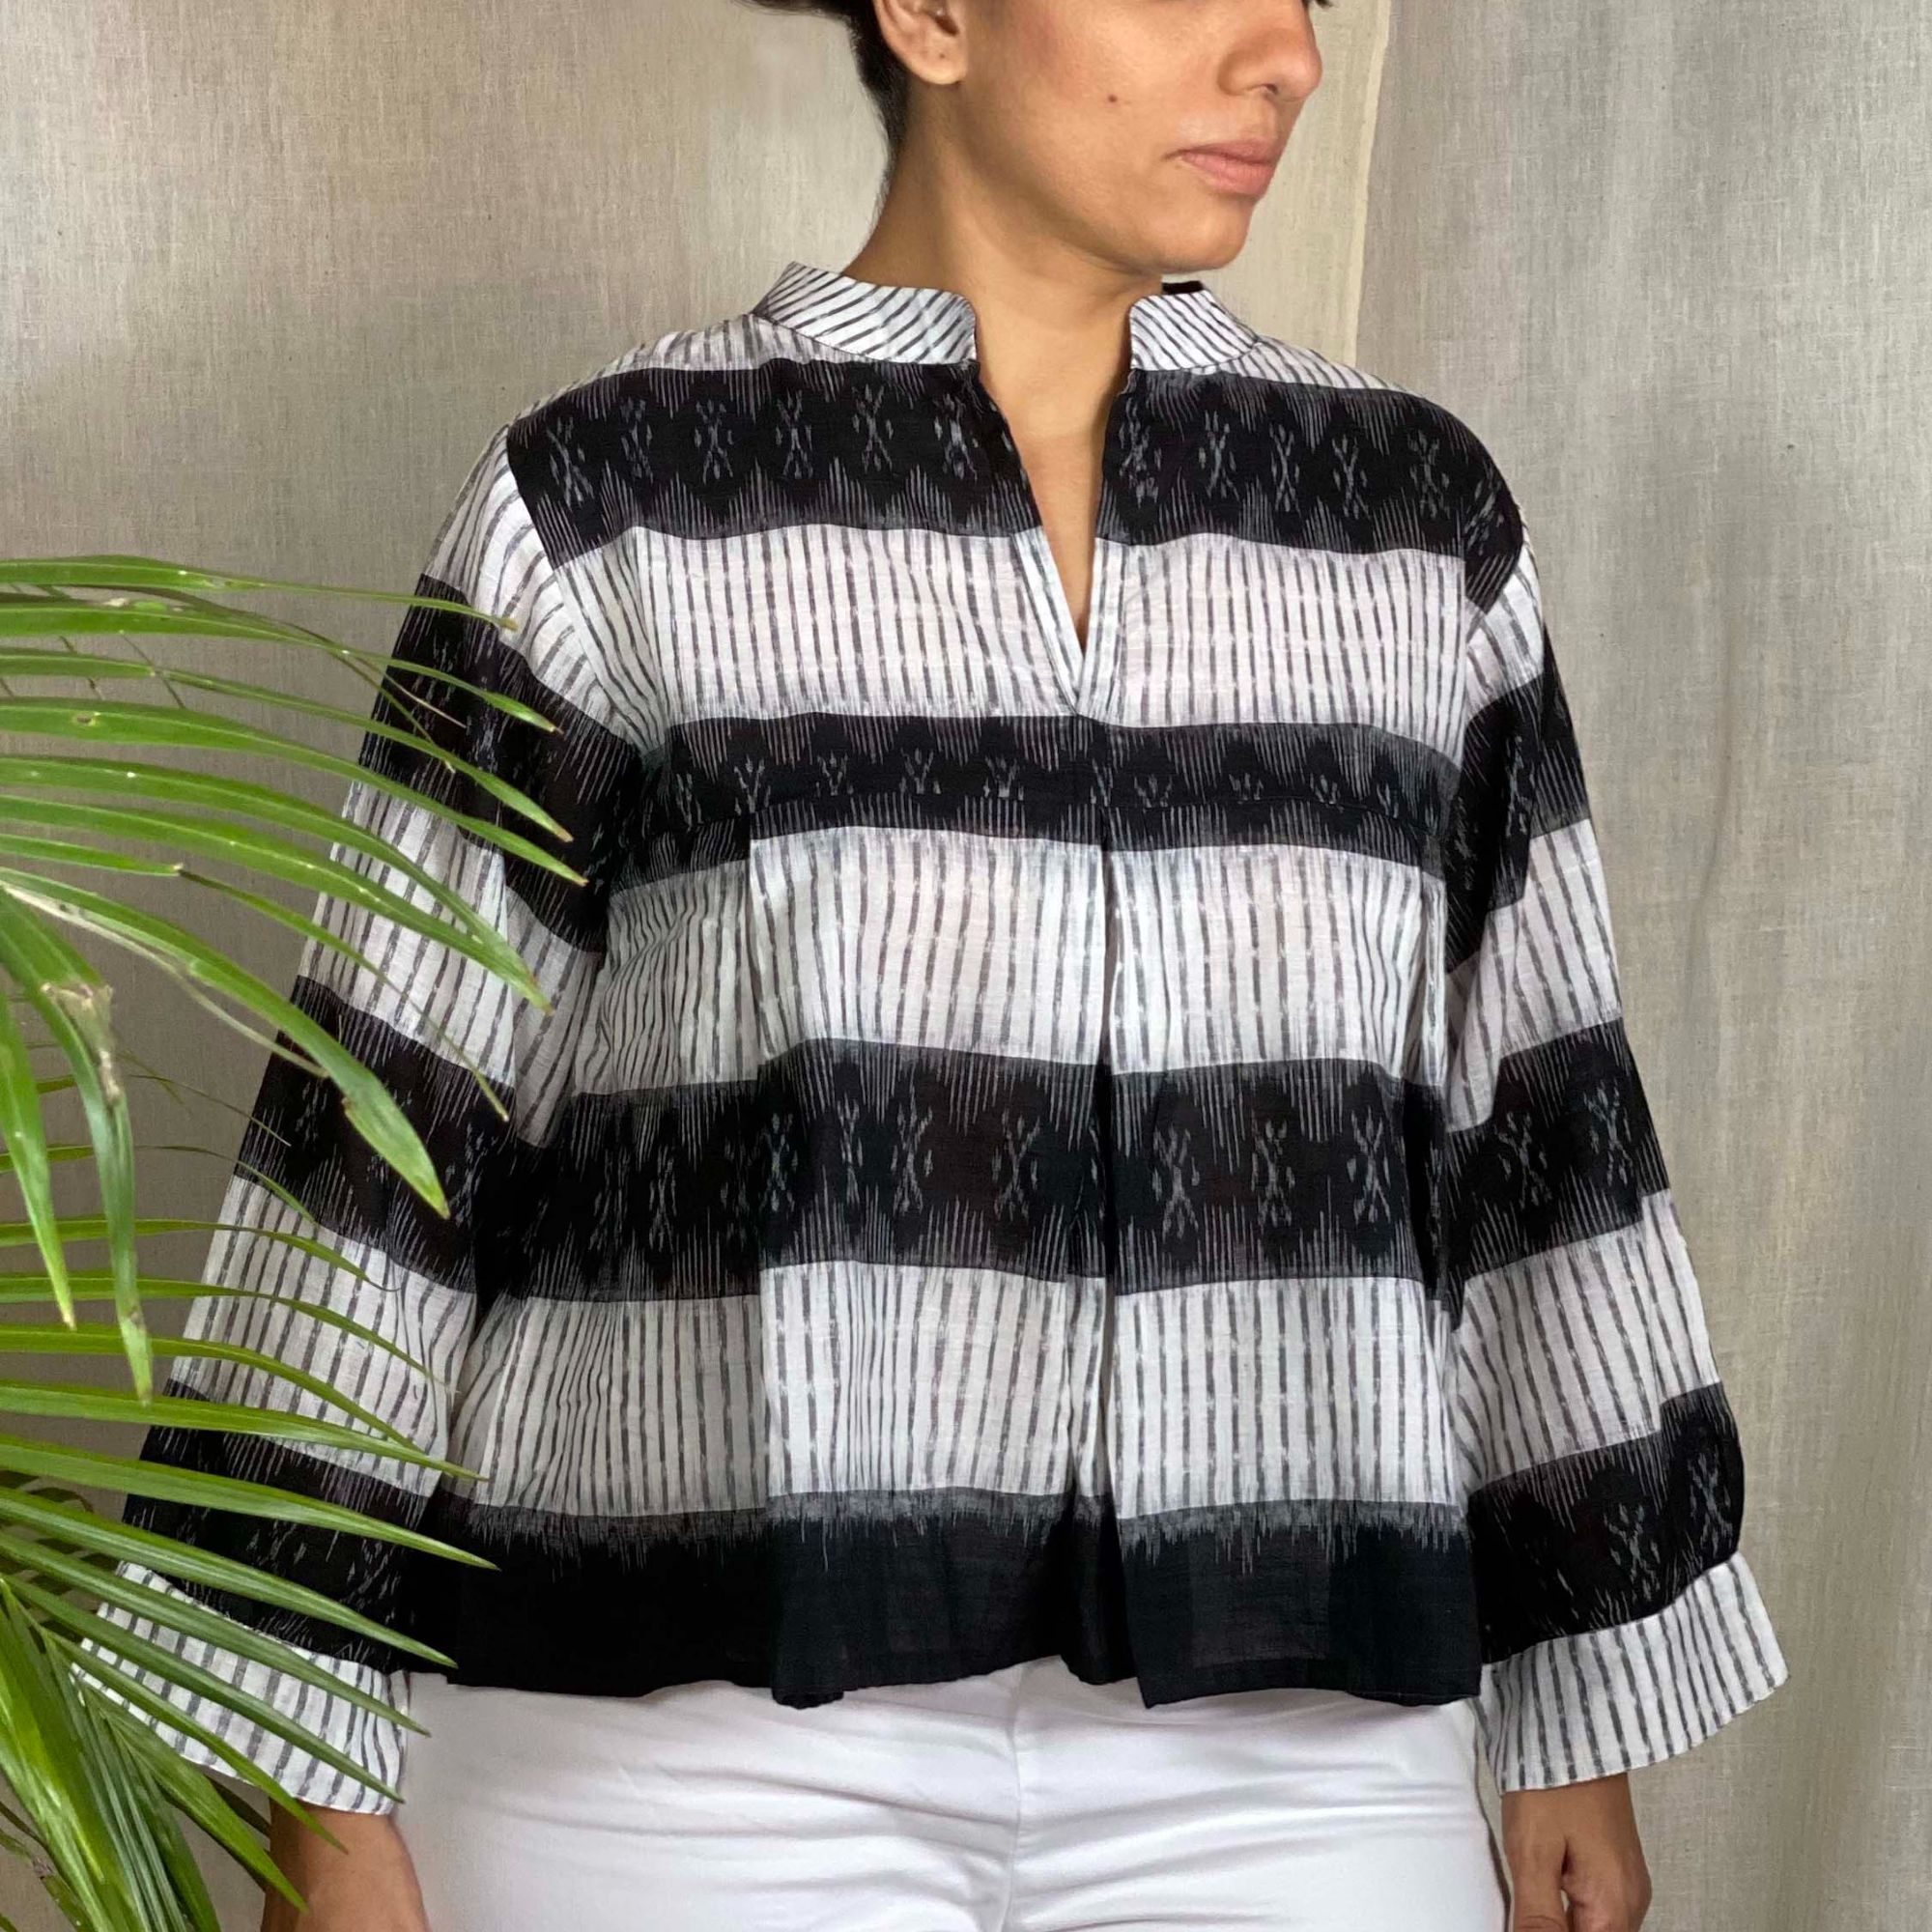 LIMA Top Ikat Black and White